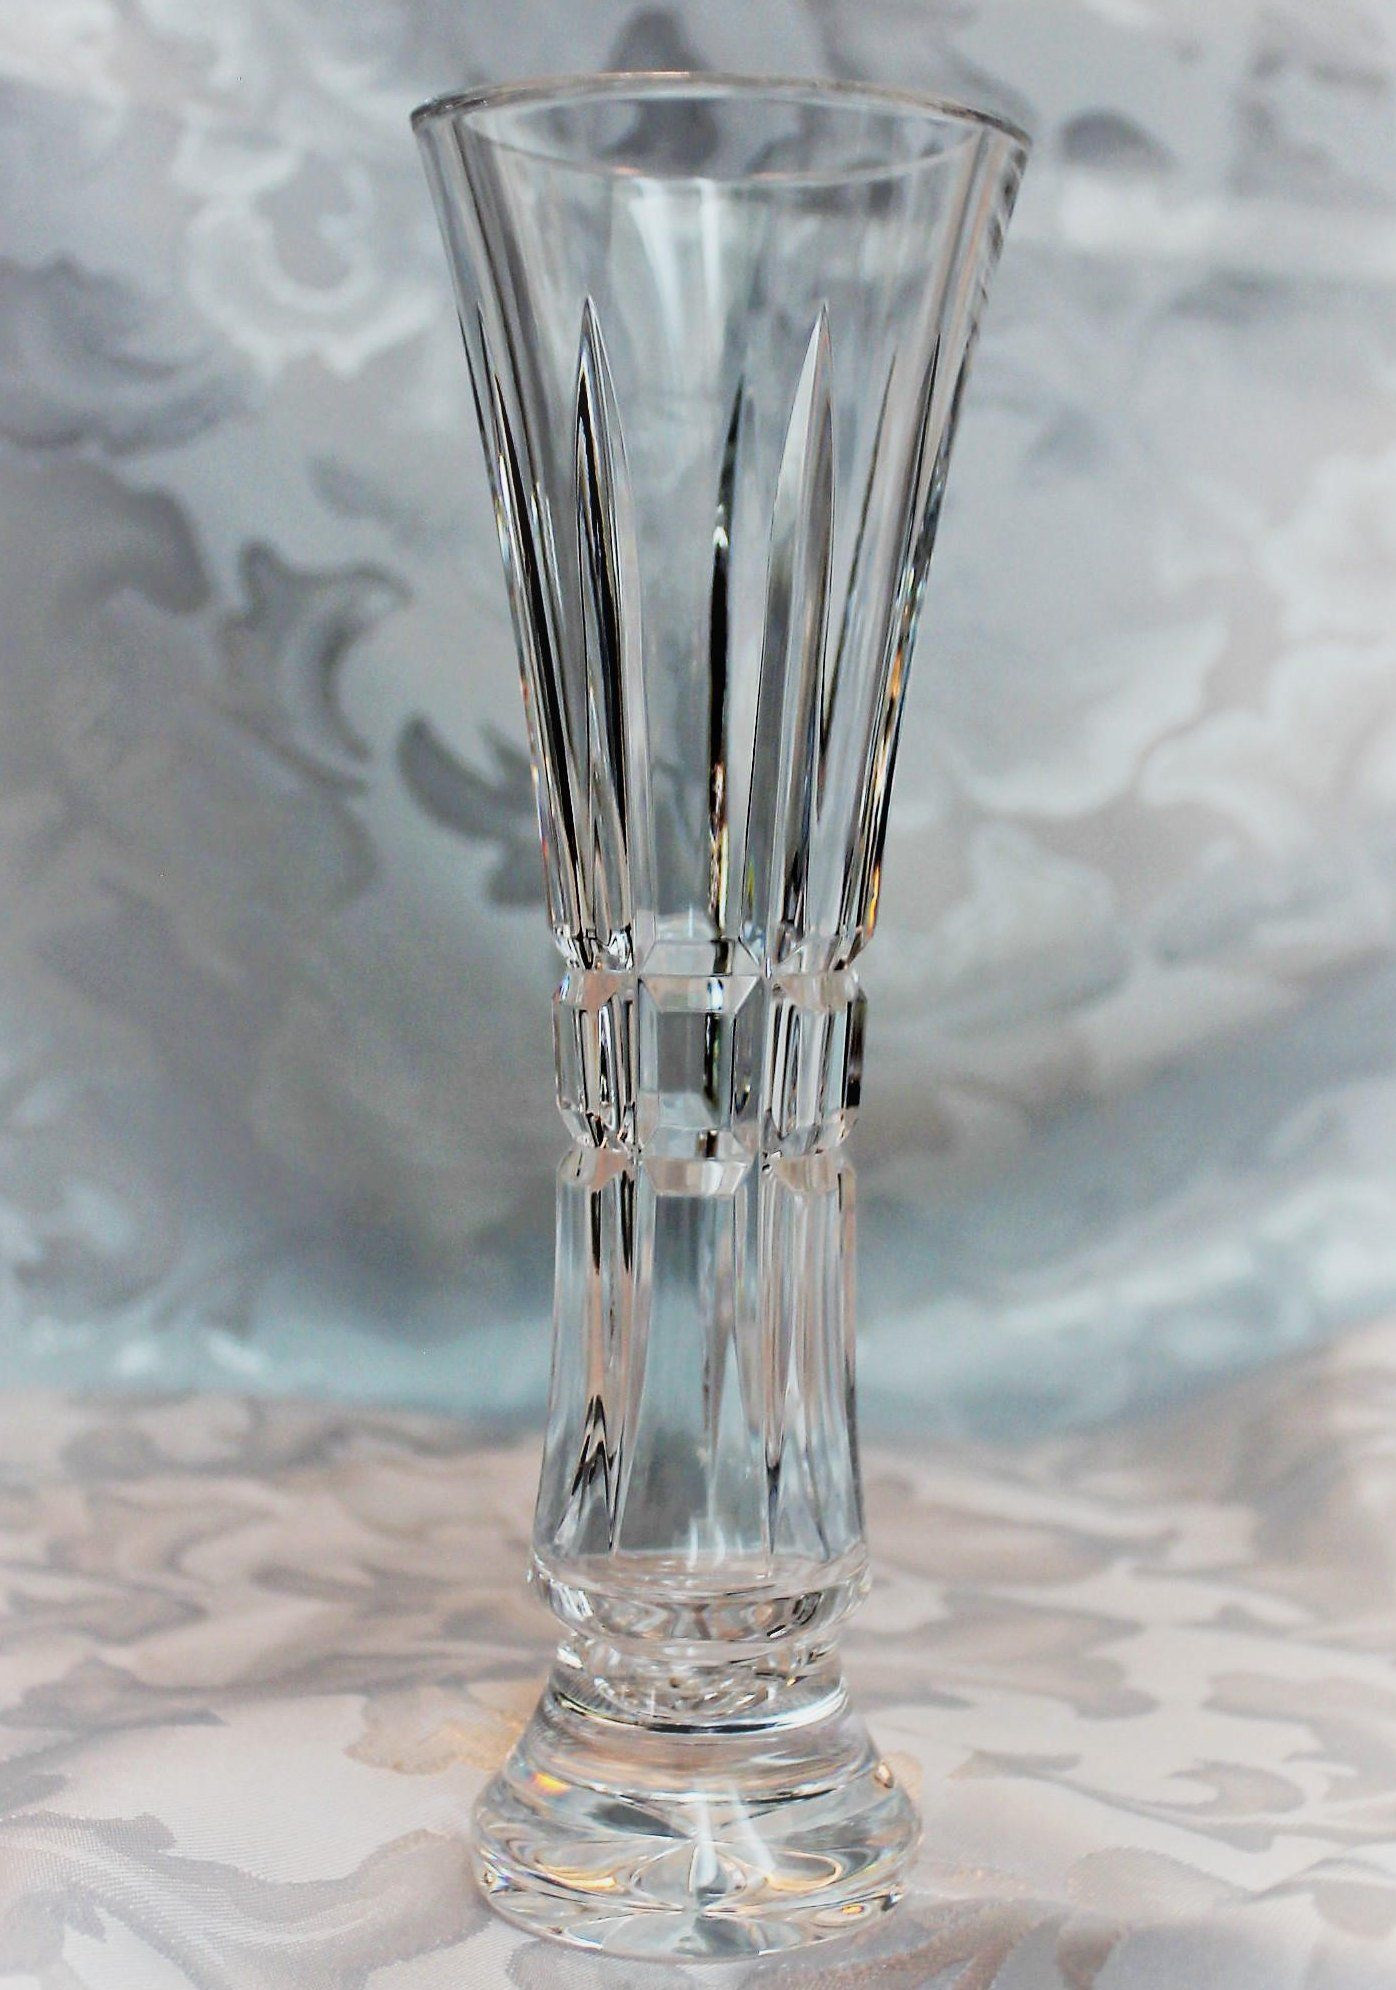 fenton hobnail glass vase of 22 hobnail glass vase the weekly world with regard to cut glass bud vase